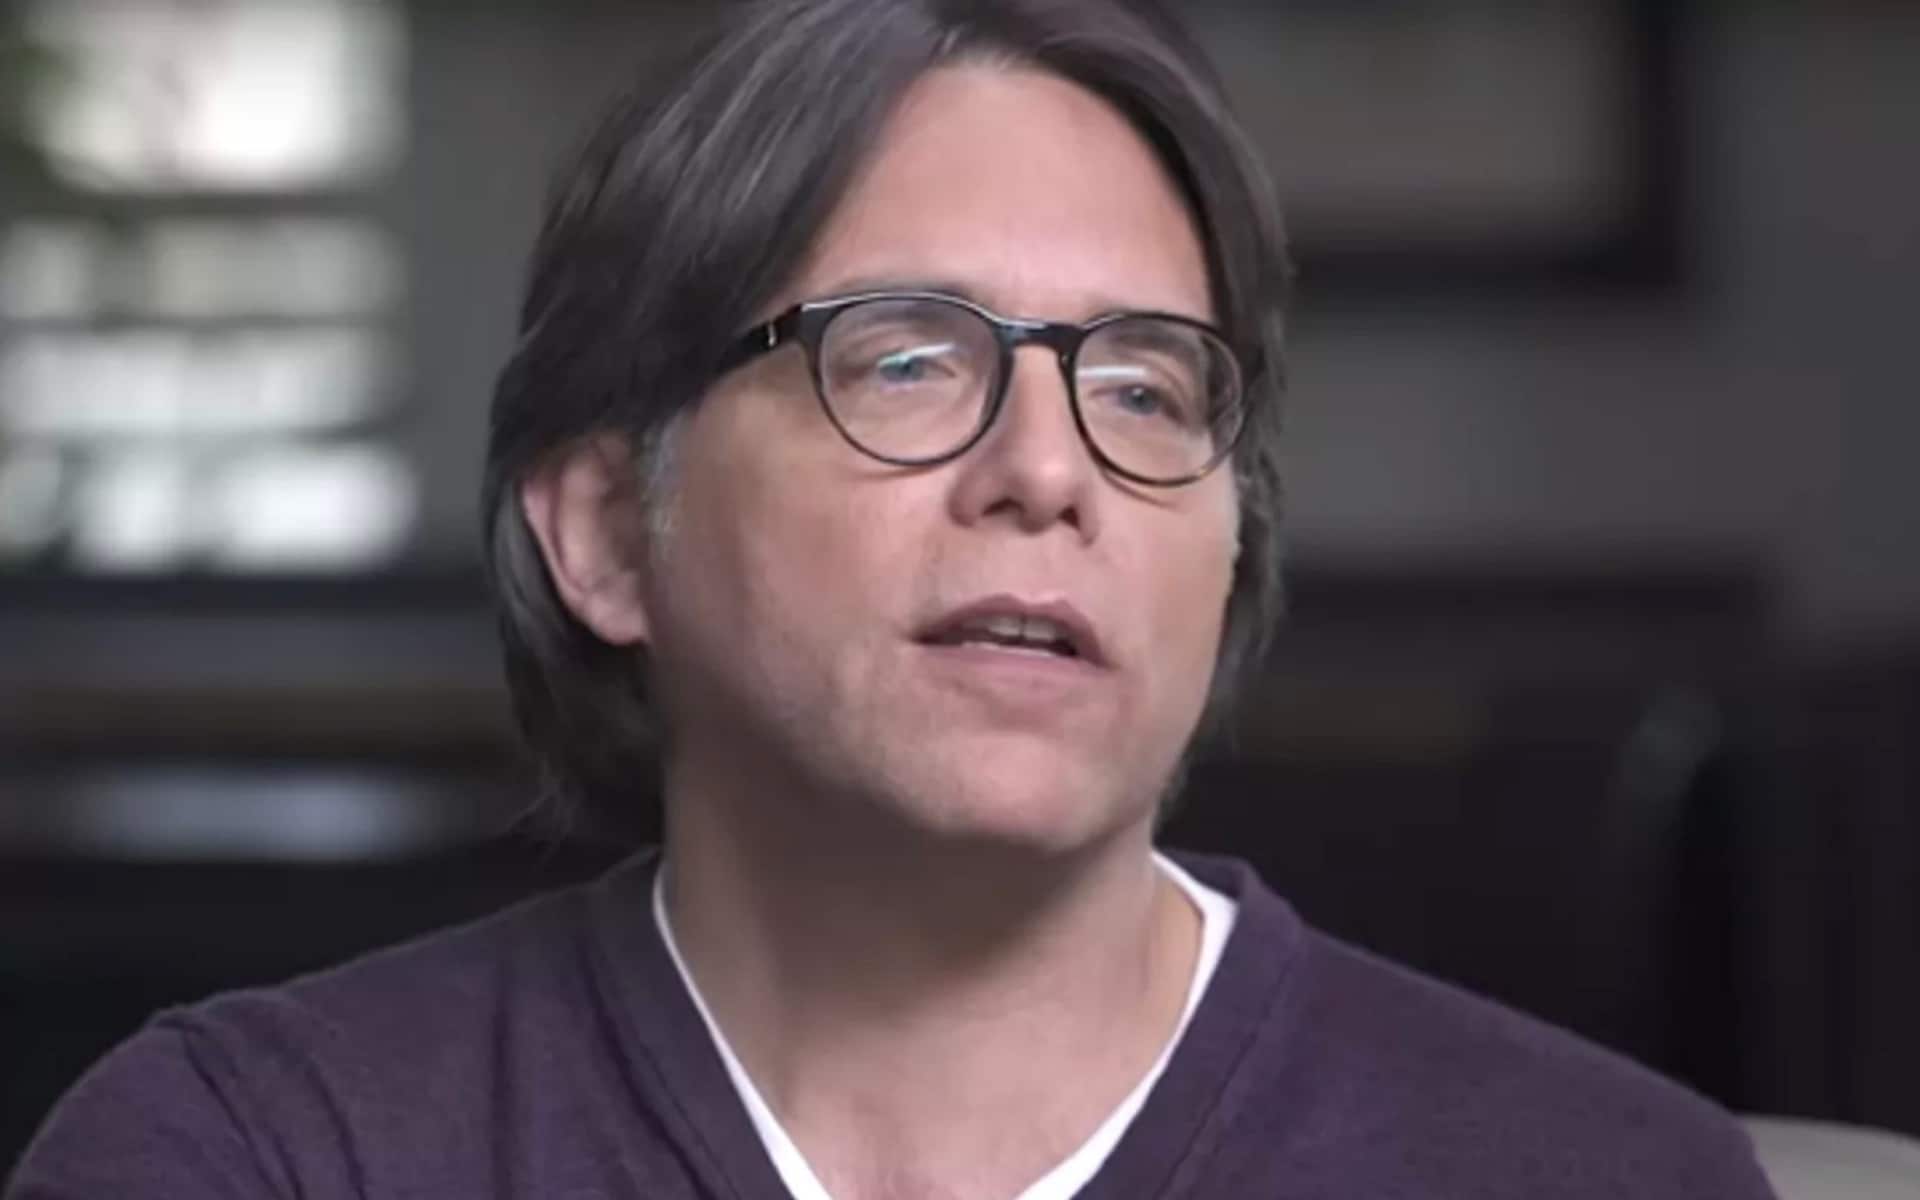 Nxivm sex cult leader Keith Raniere found guilty on all counts